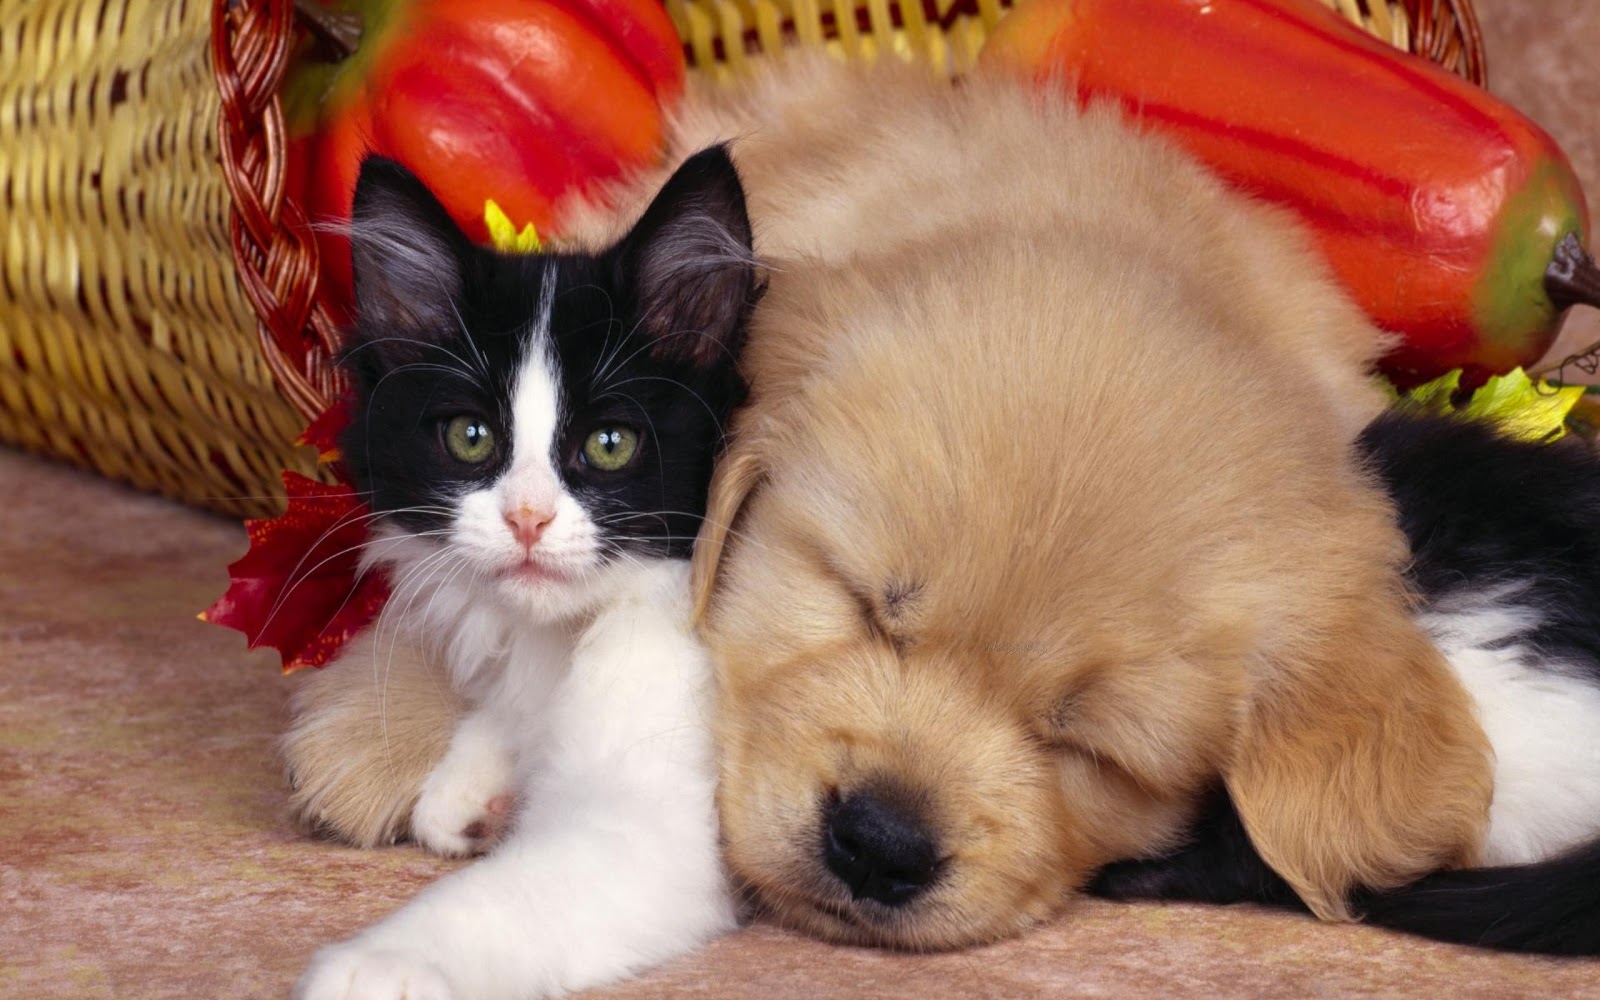 Cute Pets Dog And Cat Friendship